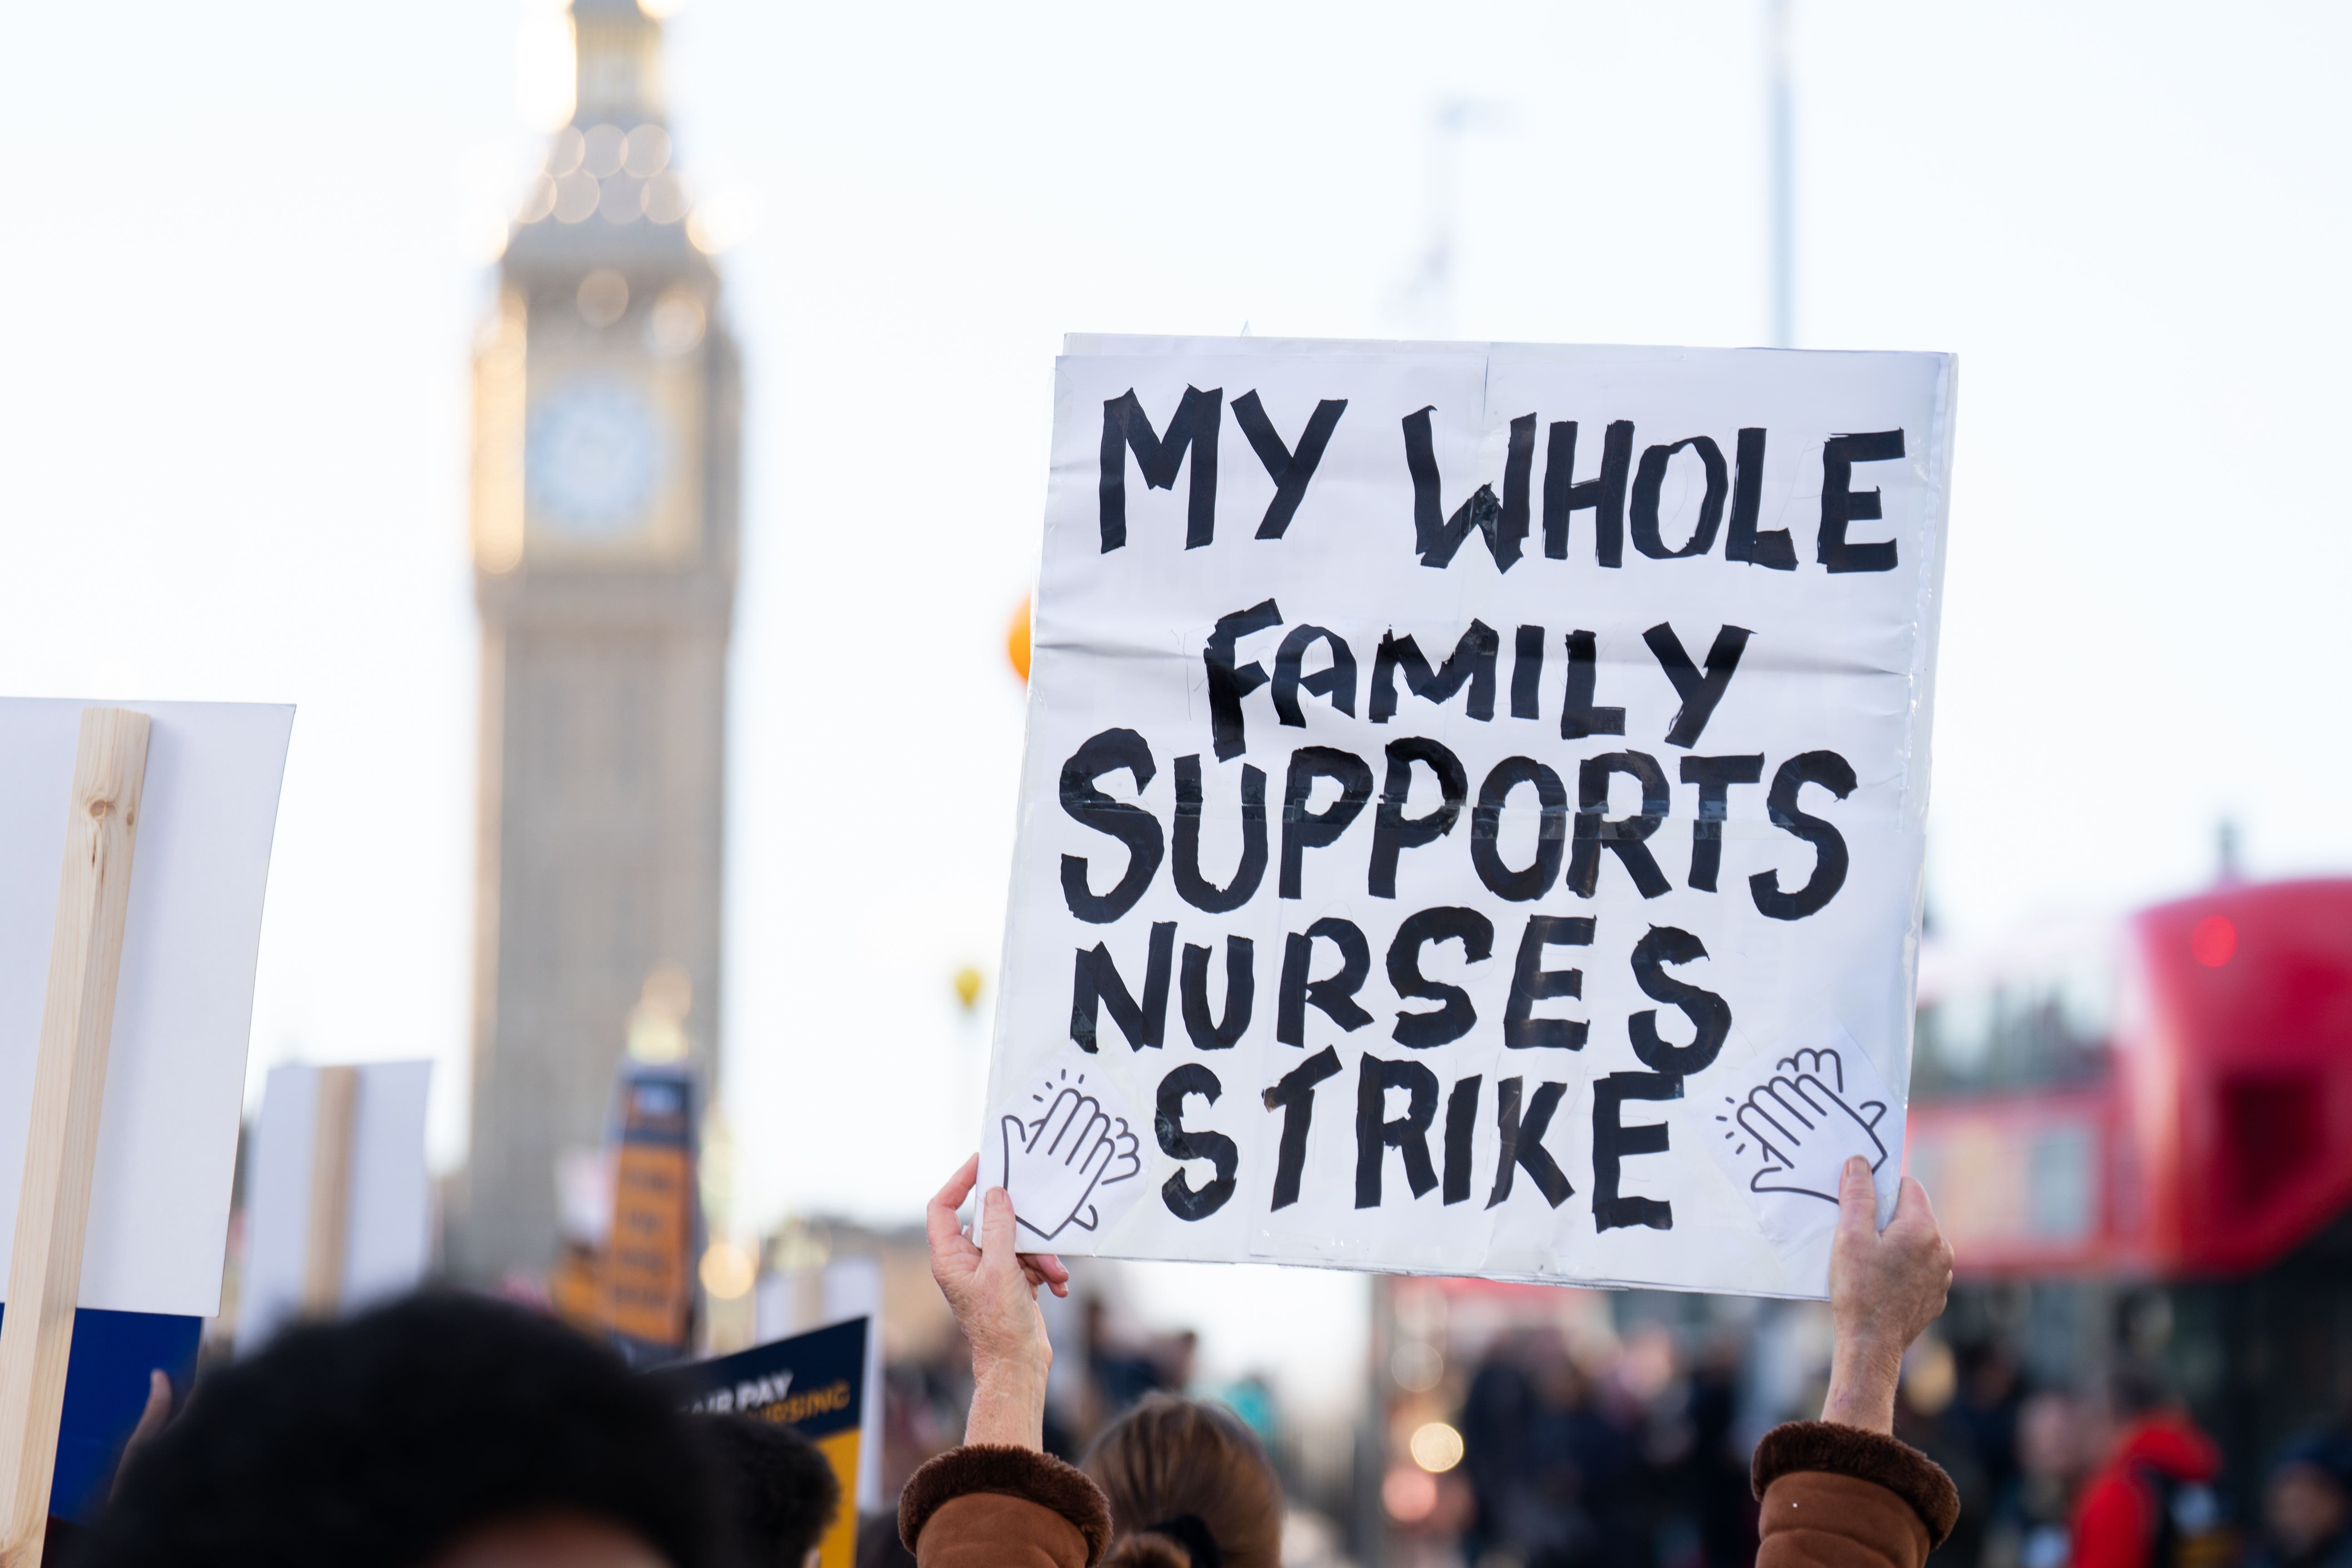 Members of the Royal College of Nursing (RCN) on the picket line outside St Thomas’ Hospital, central London (James Manning/PA)